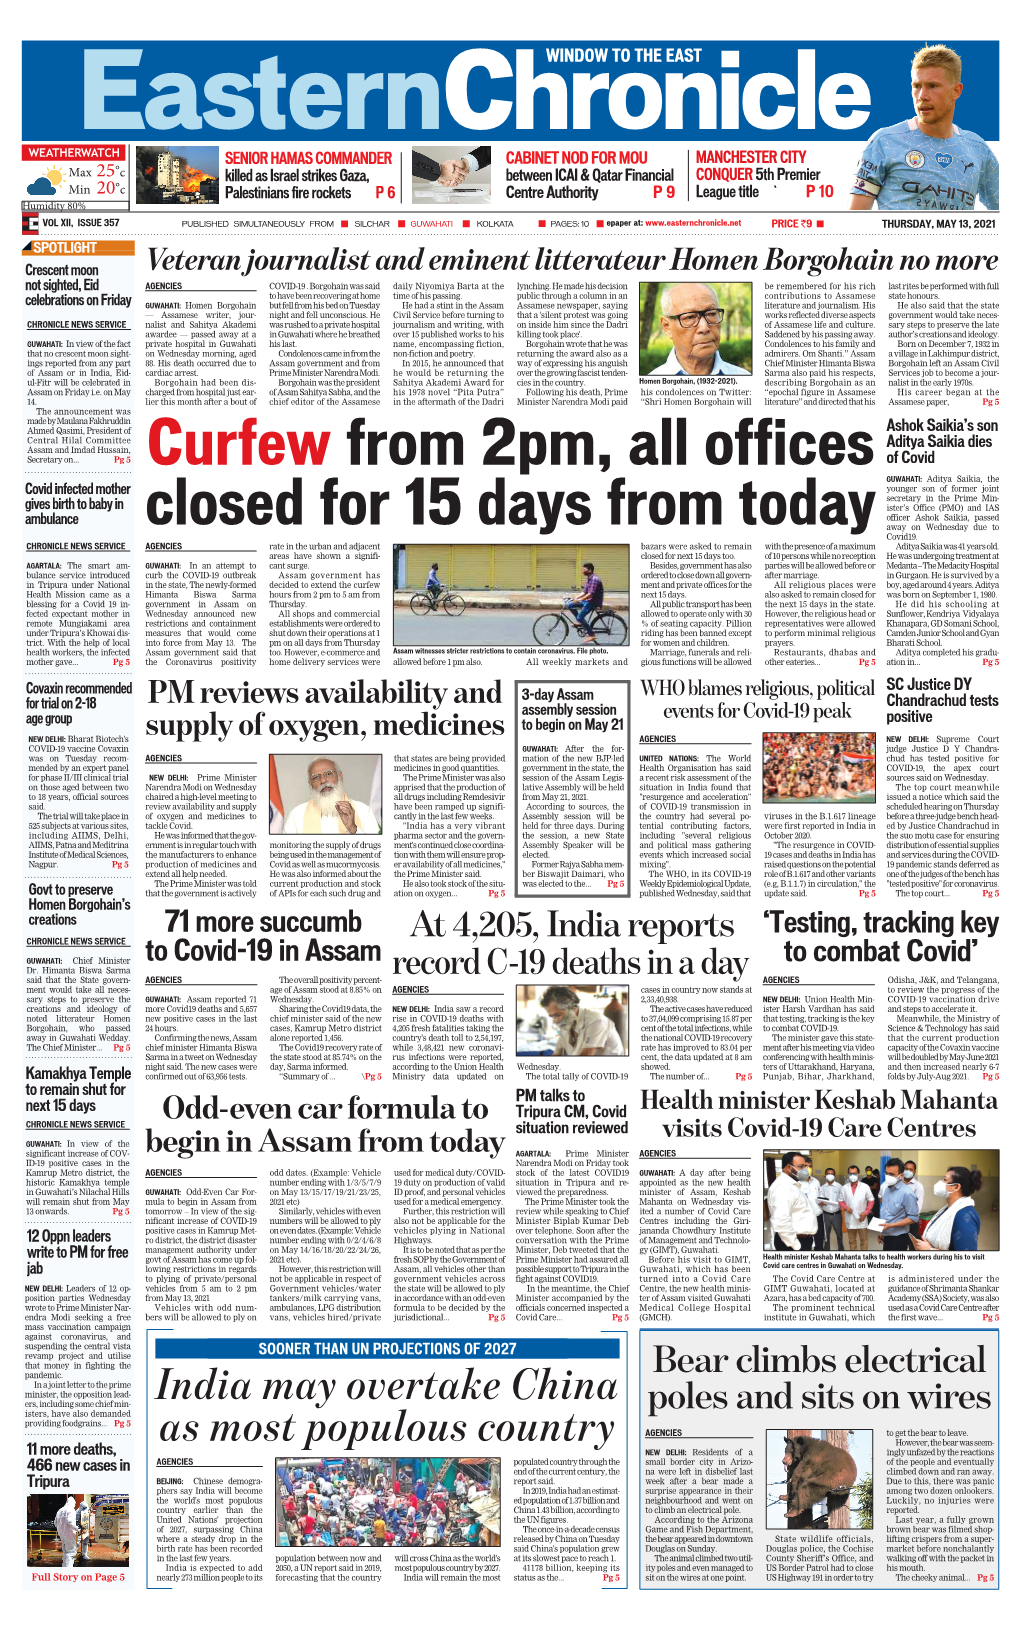 Curfew from 2Pm, All Offices Closed for 15 Days from Today